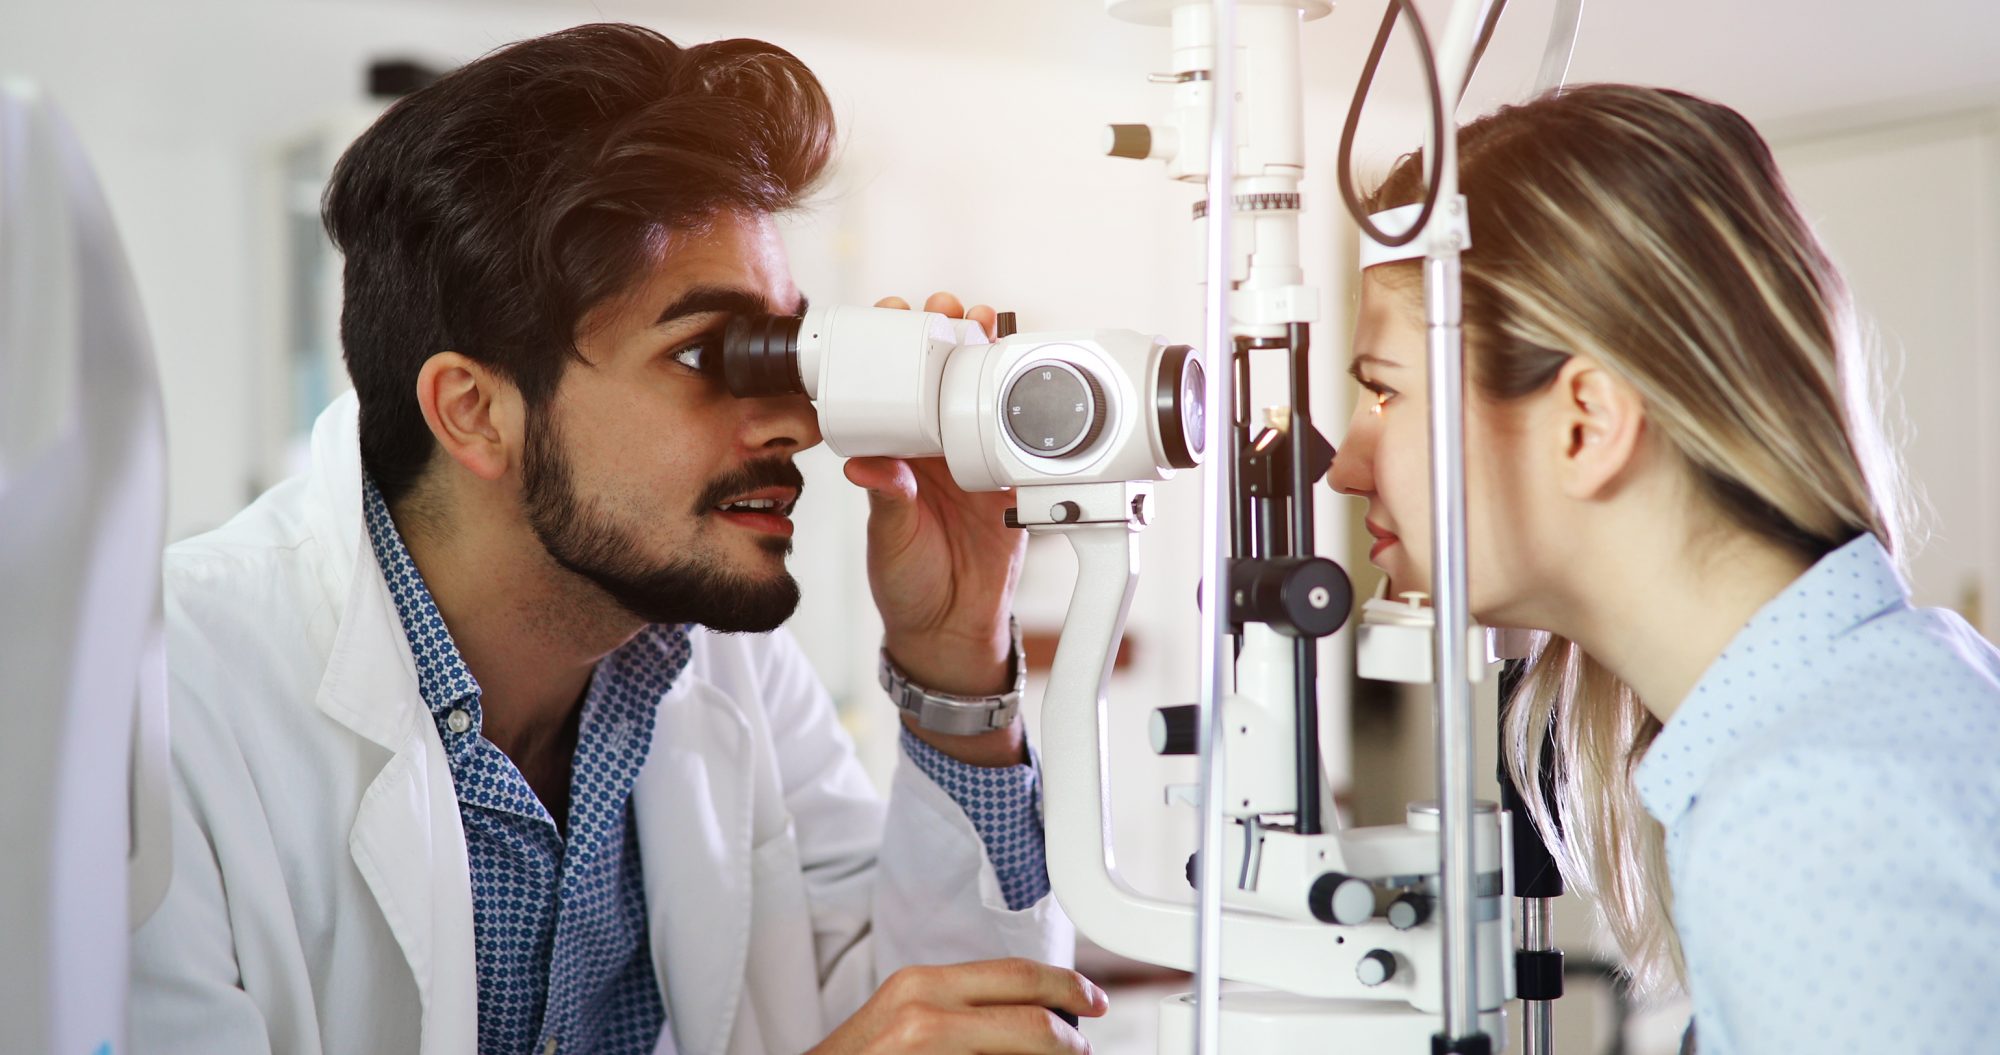 The role of technology in ophthalmology